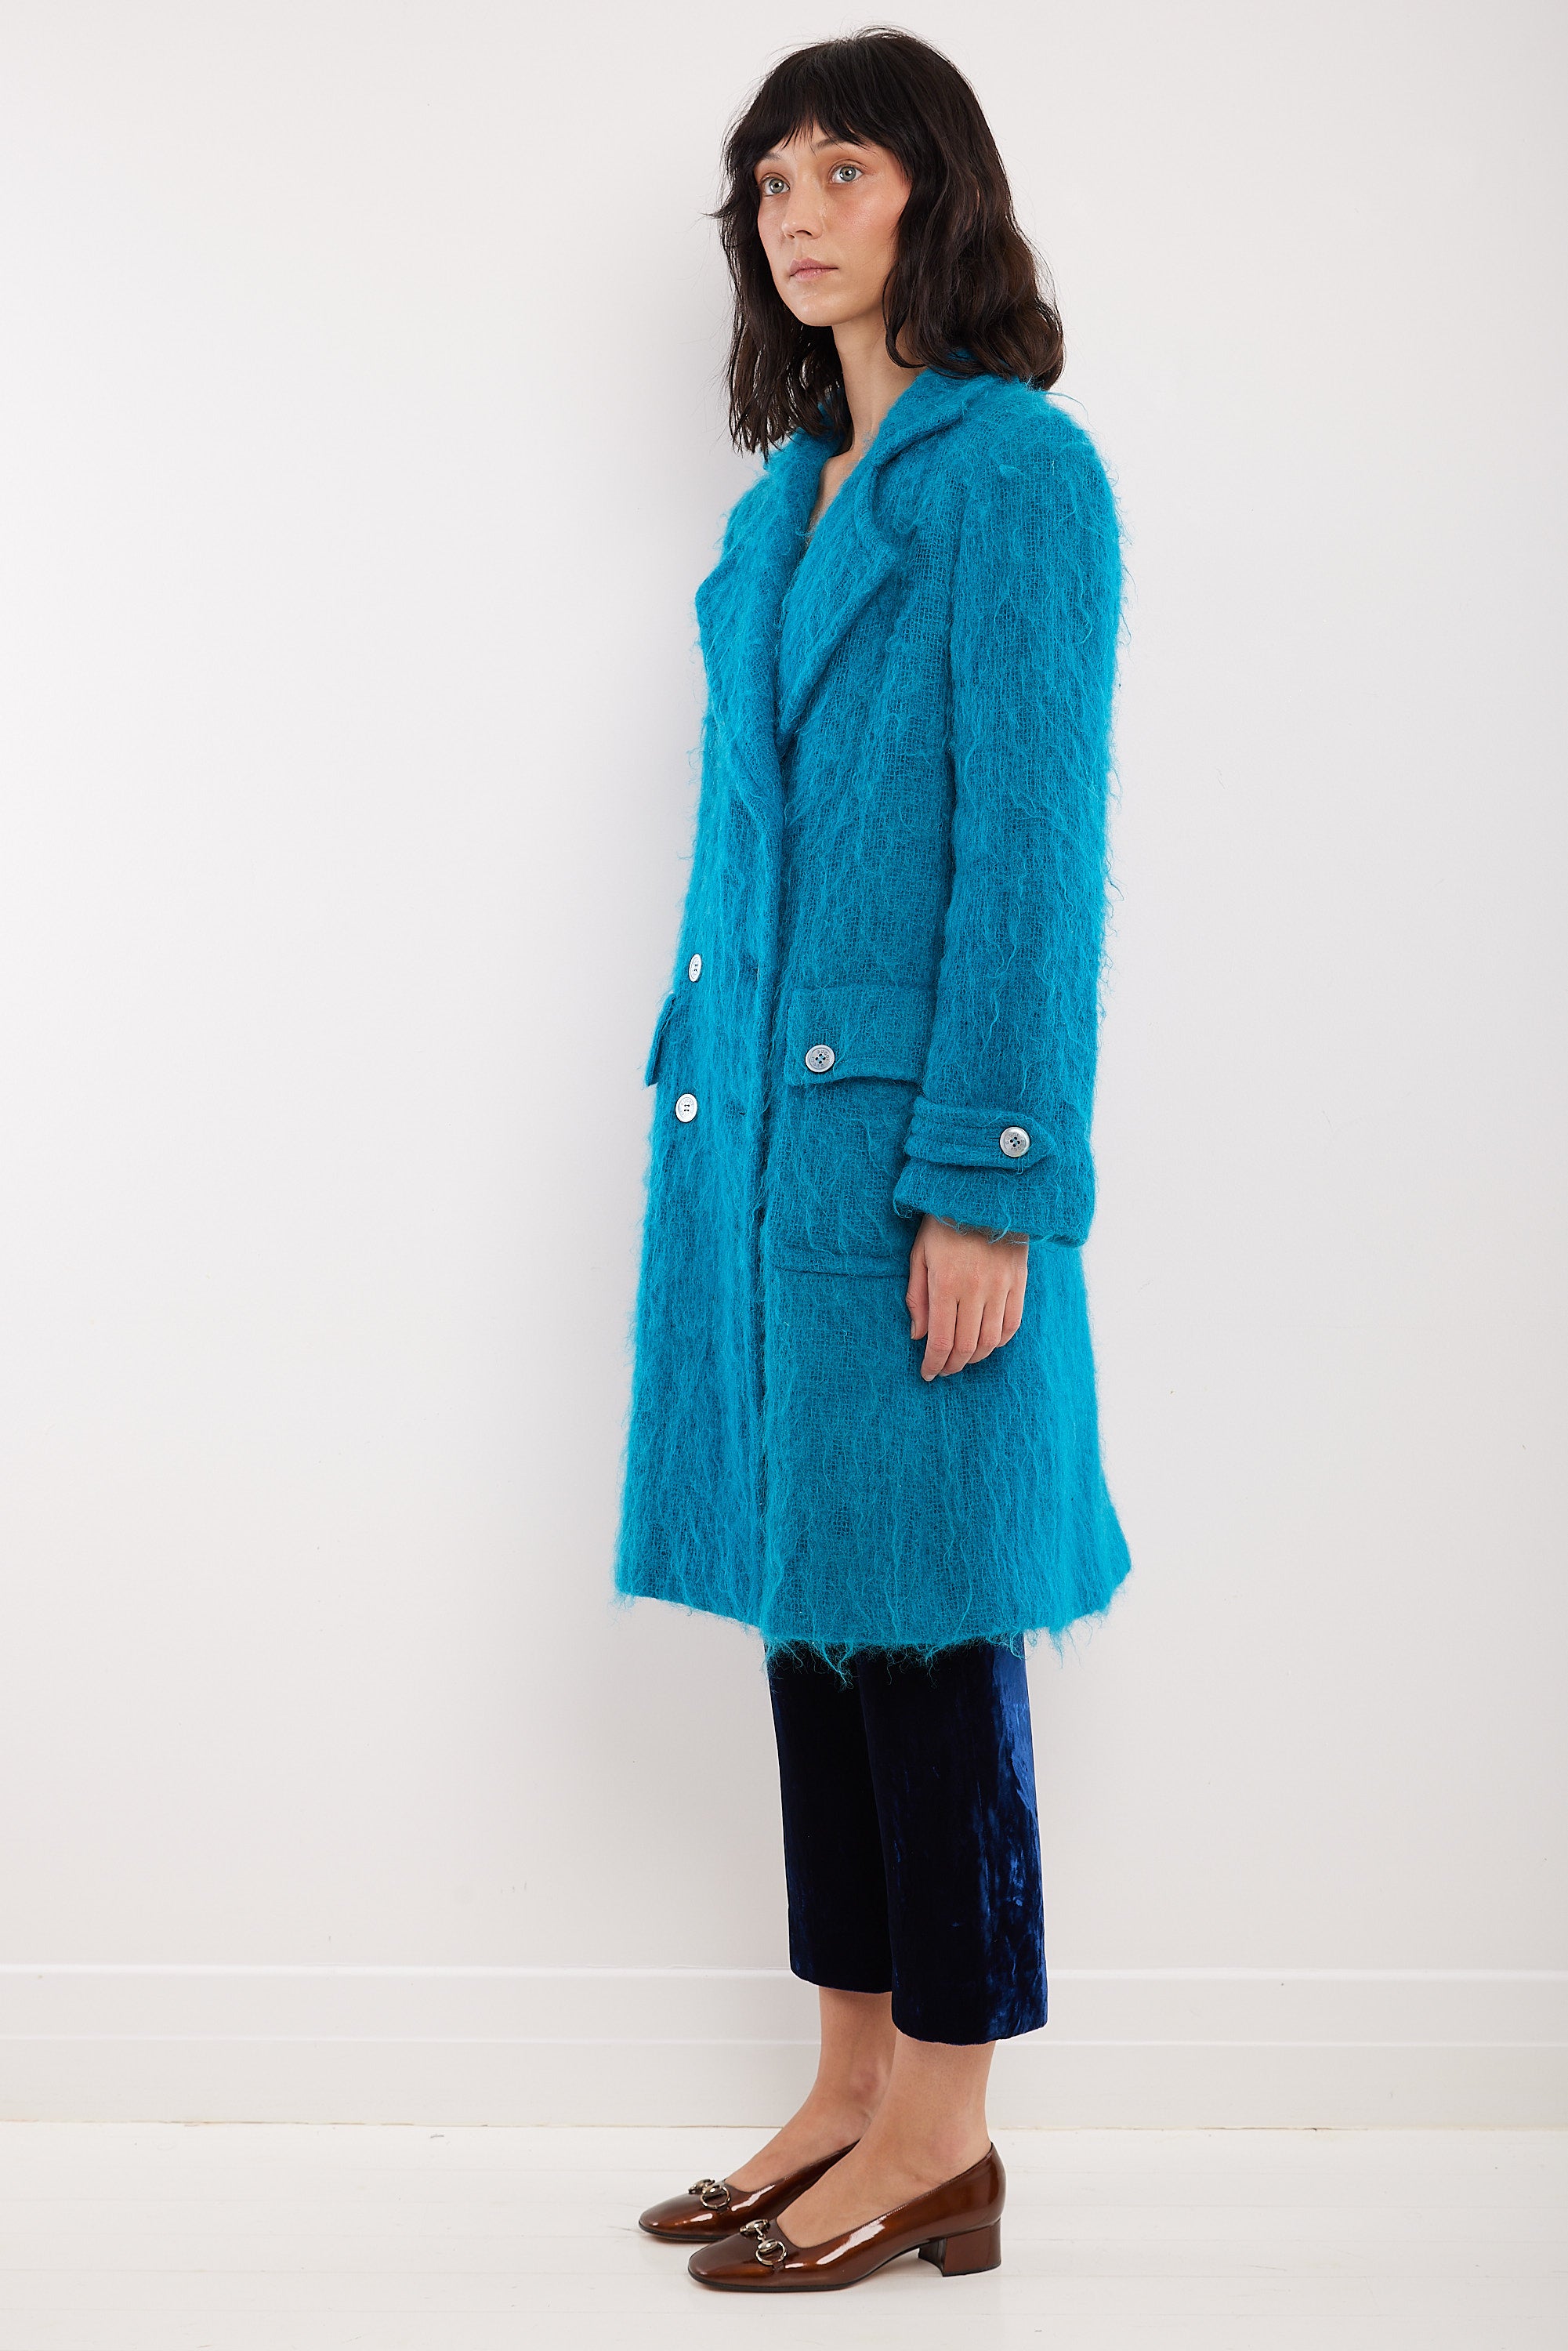 Gucci <br> Tom Ford F/W 1995 runway & campaign mohair coat